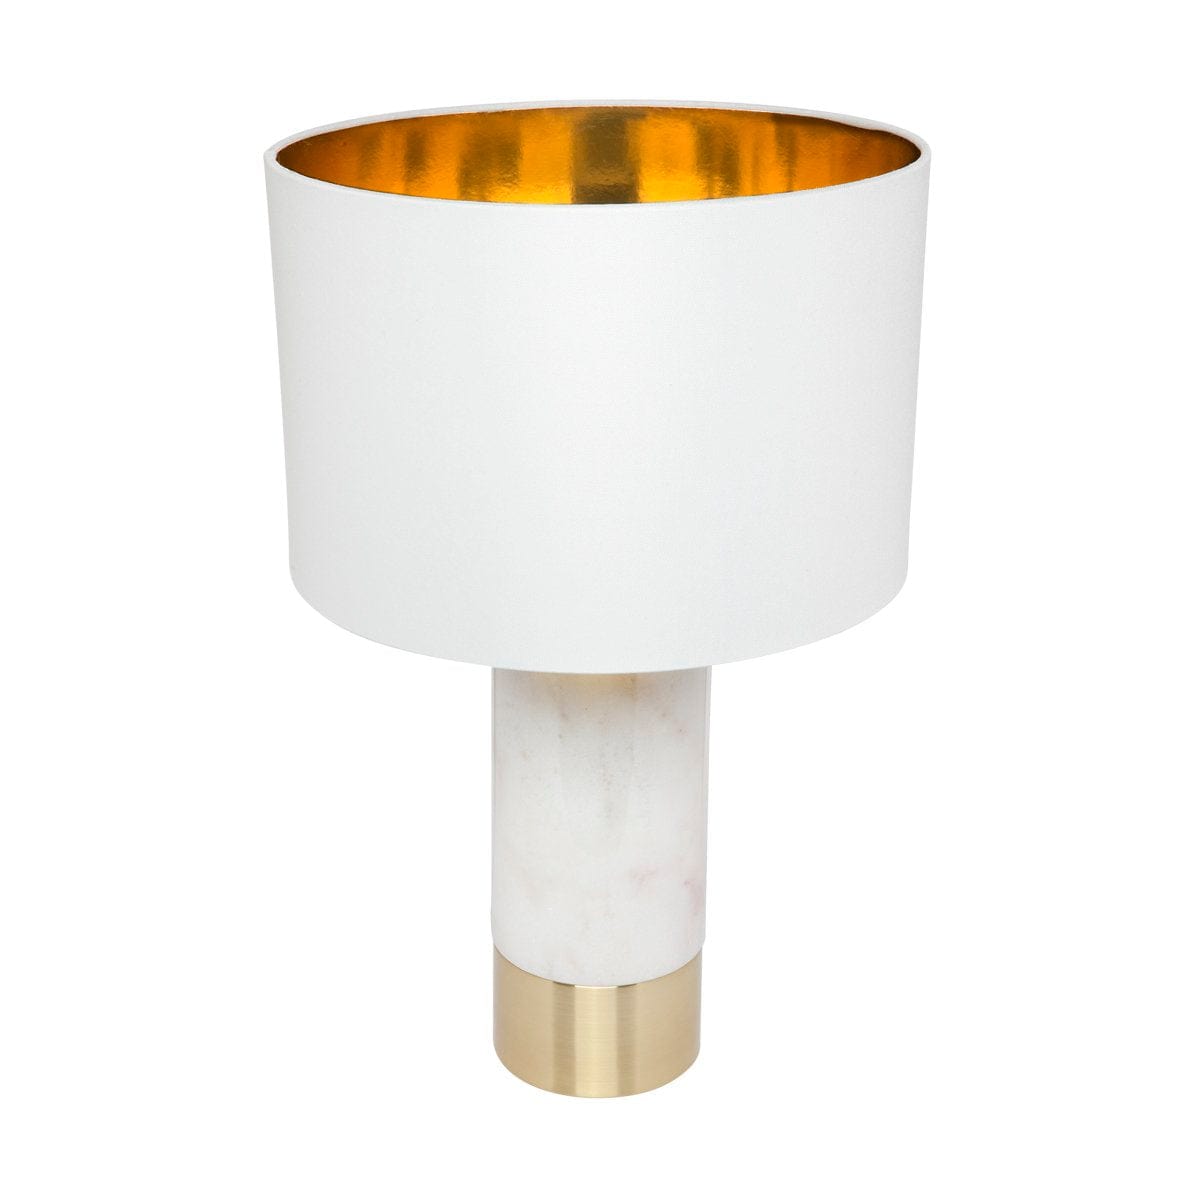 CAFE LIGHTING & LIVING Table Lamp Paola Marble Table Lamp - White w White Shade B12271